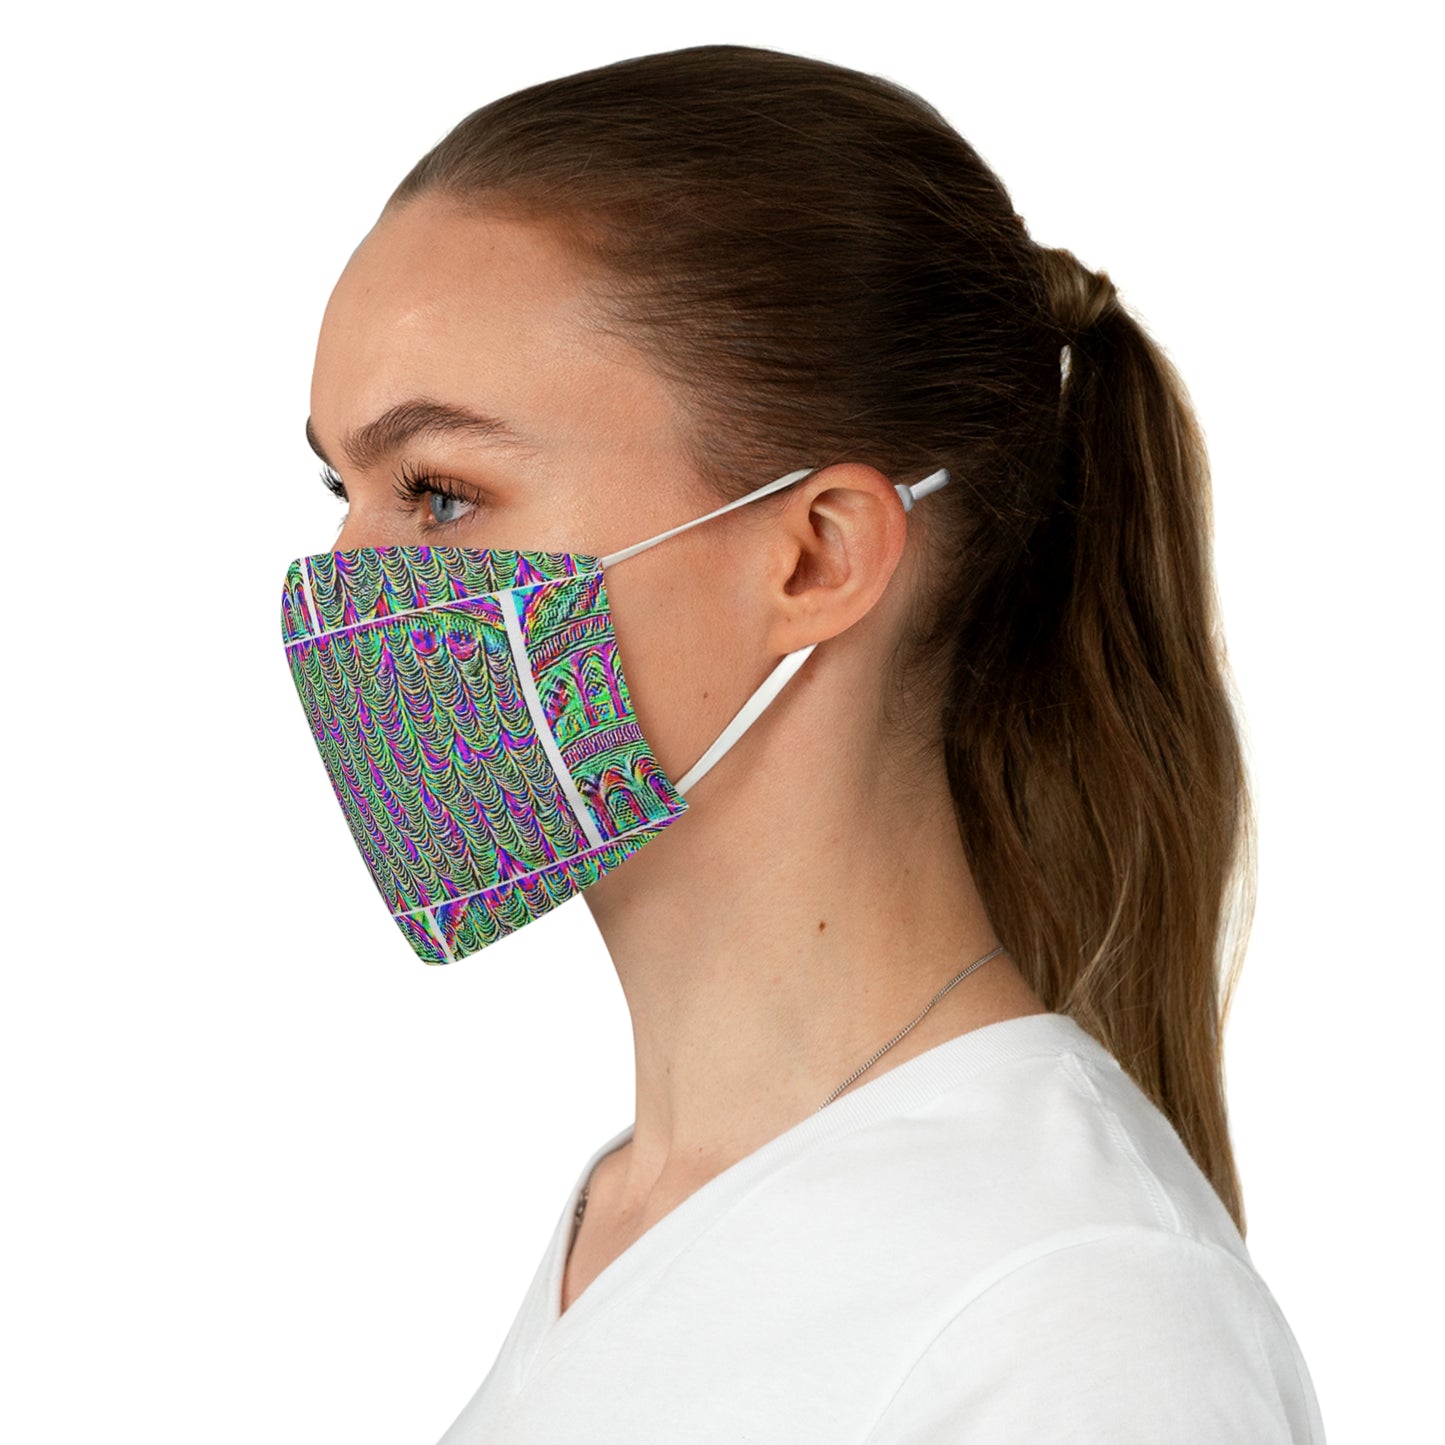 Adversarial Pattern / Anti Facial recognition / Fabric Face Mask